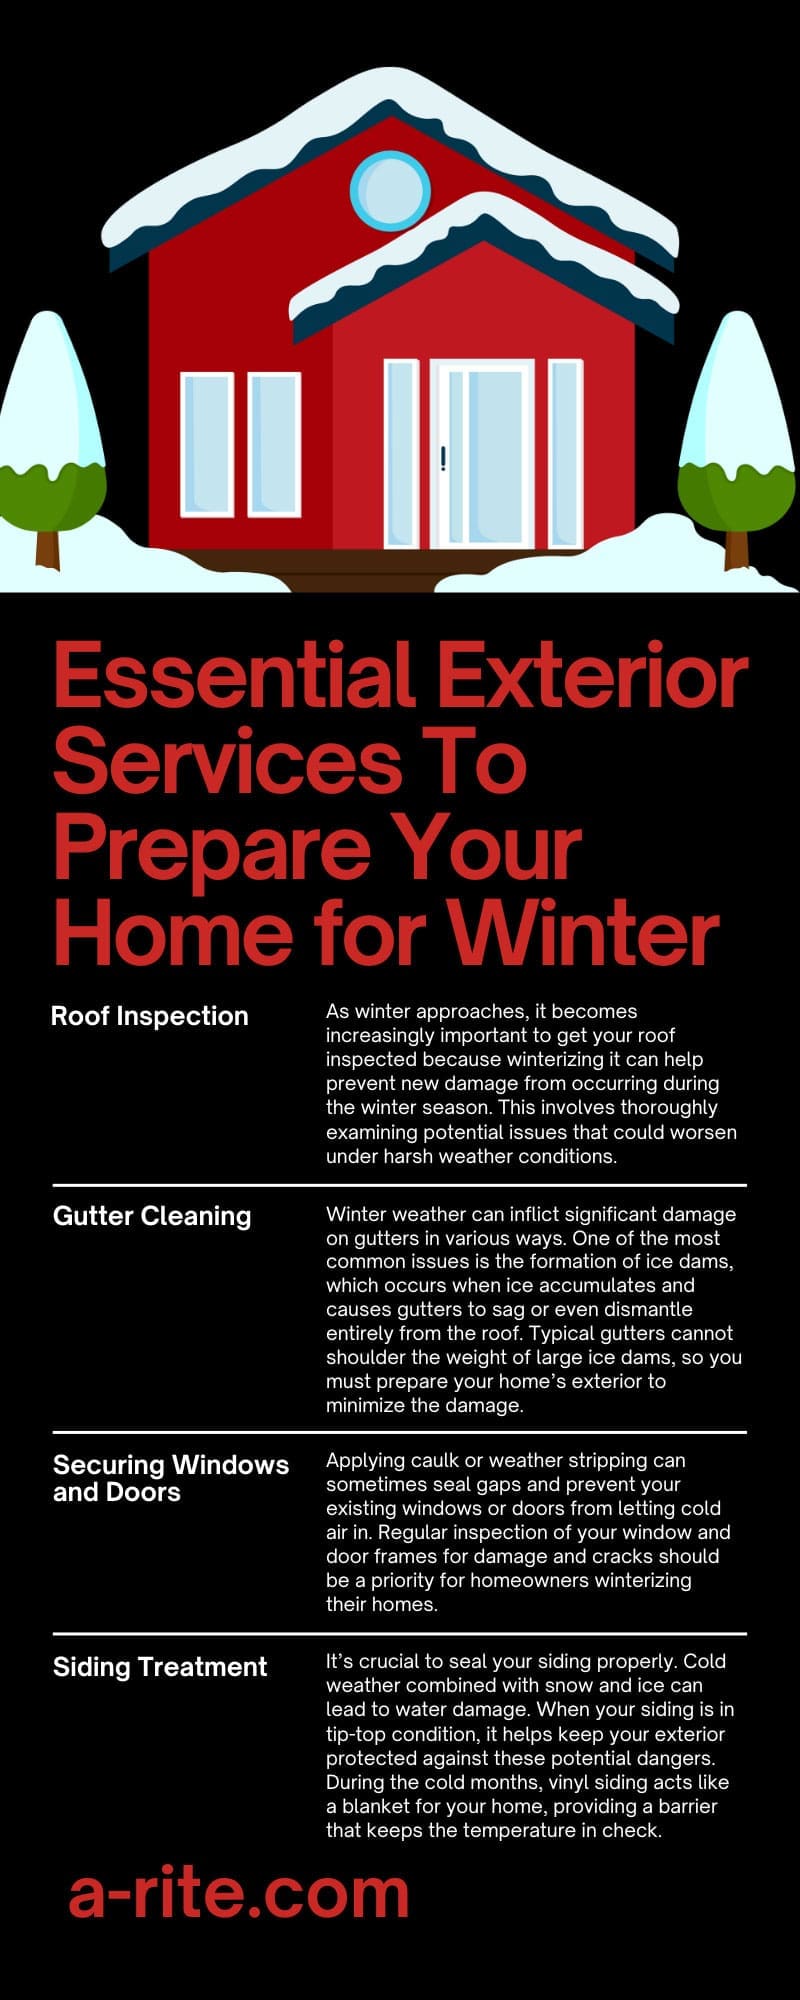 Essential Exterior Services To Prepare Your Home for Winter